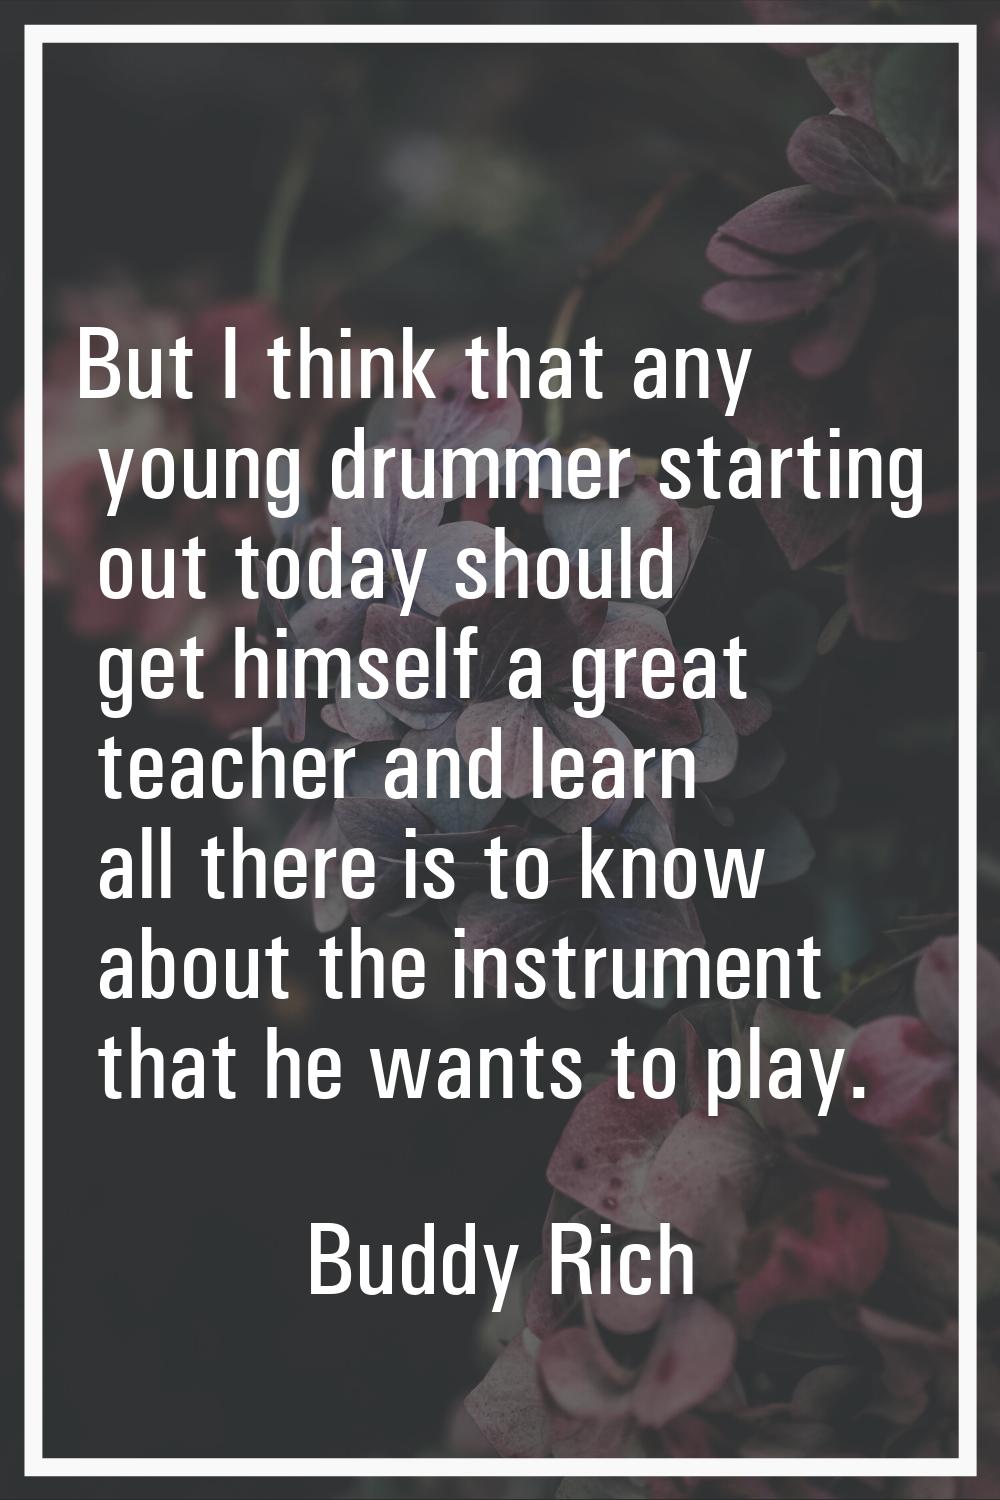 But I think that any young drummer starting out today should get himself a great teacher and learn 